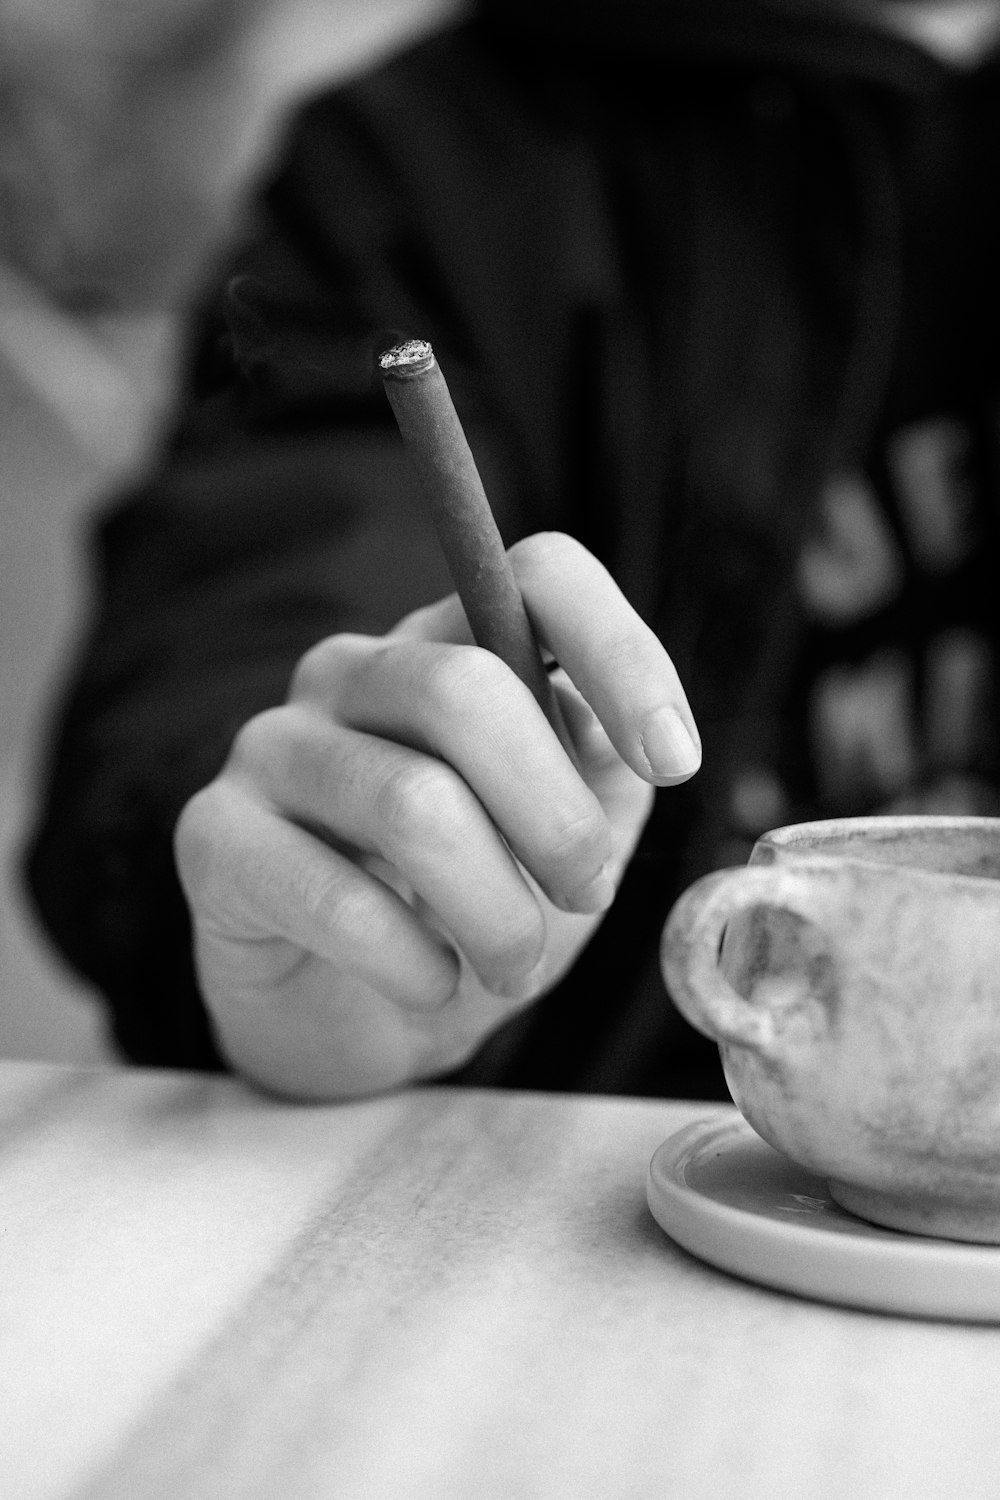 a person sitting at a table with a cup and a cigarette